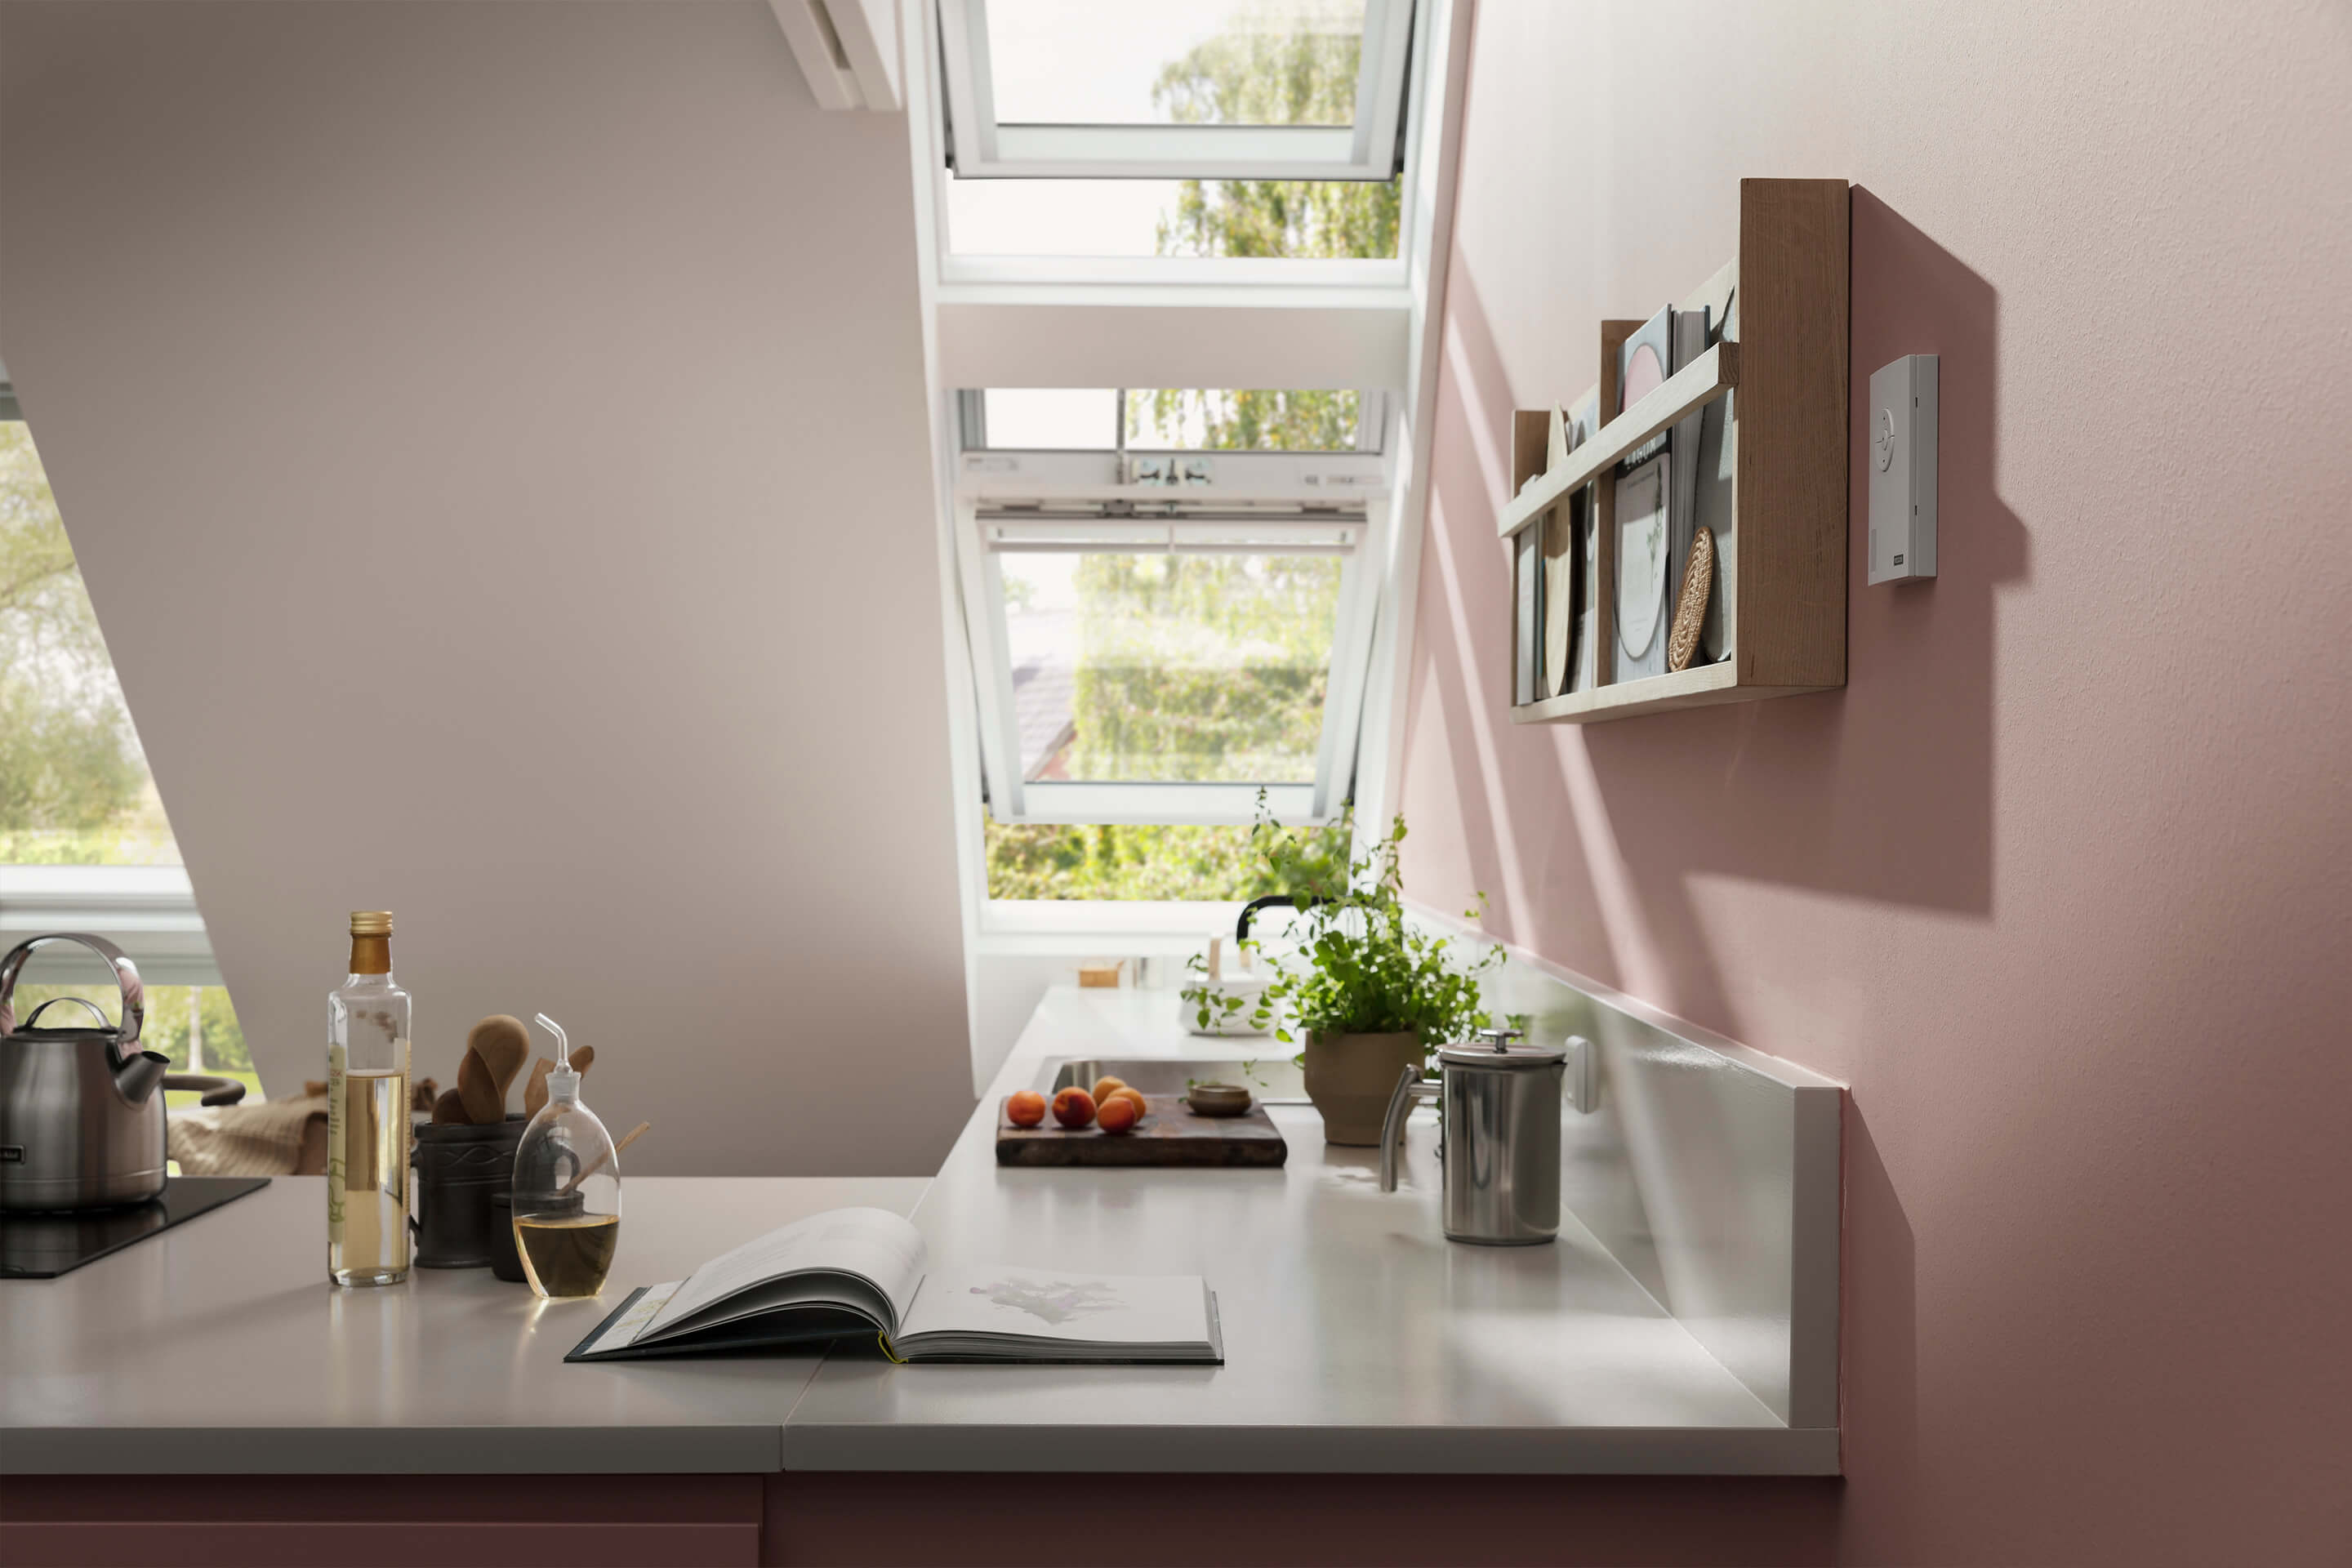 Modern kitchen with VELUX roof window, white countertops, and pink walls.